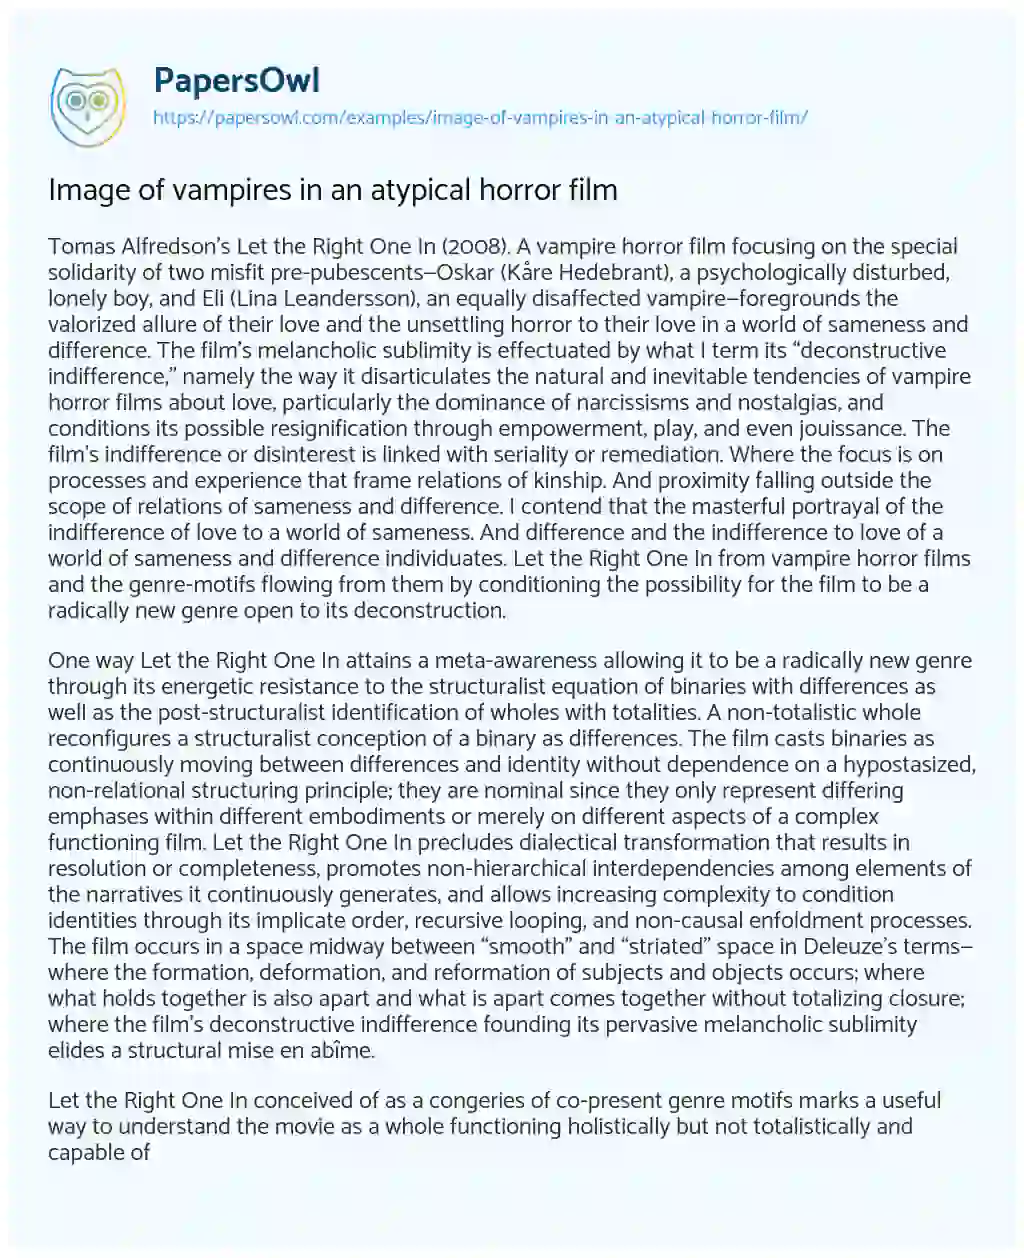 Essay on Image of Vampires in an Atypical Horror Film